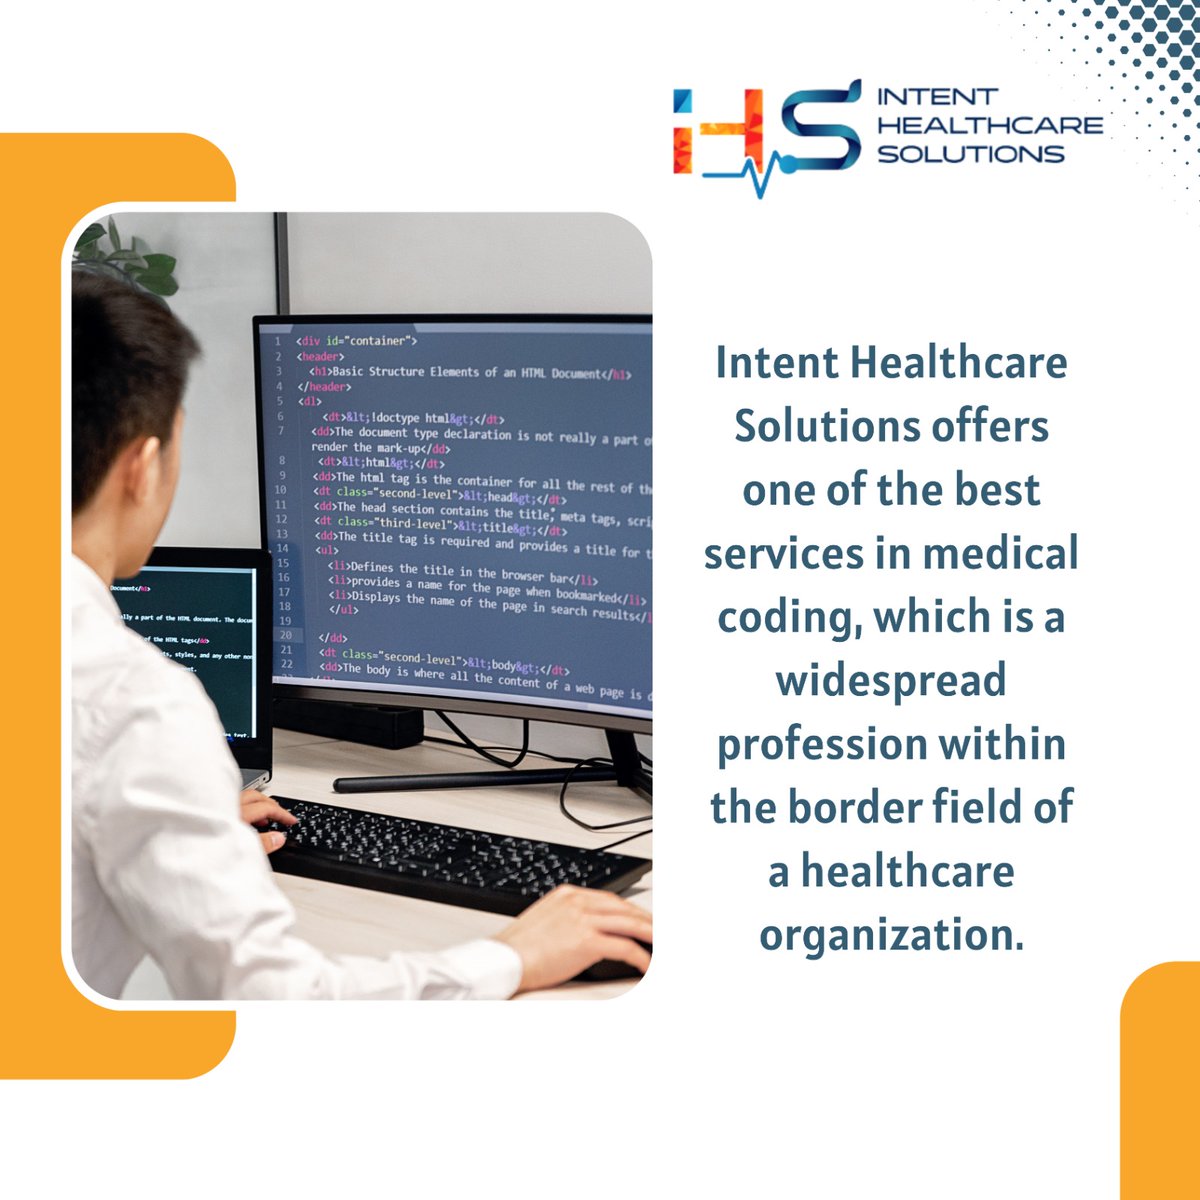 Intent healthcare solution offers an extensive and reliable medical coding services to both providers and billing.

#intenthealthcaresolutions #medicalcoding #medicalinsurance #nationalhealthpolicy #universalhealthcoverage #healthcareprovider #healthcareinsurance #homehealthcares